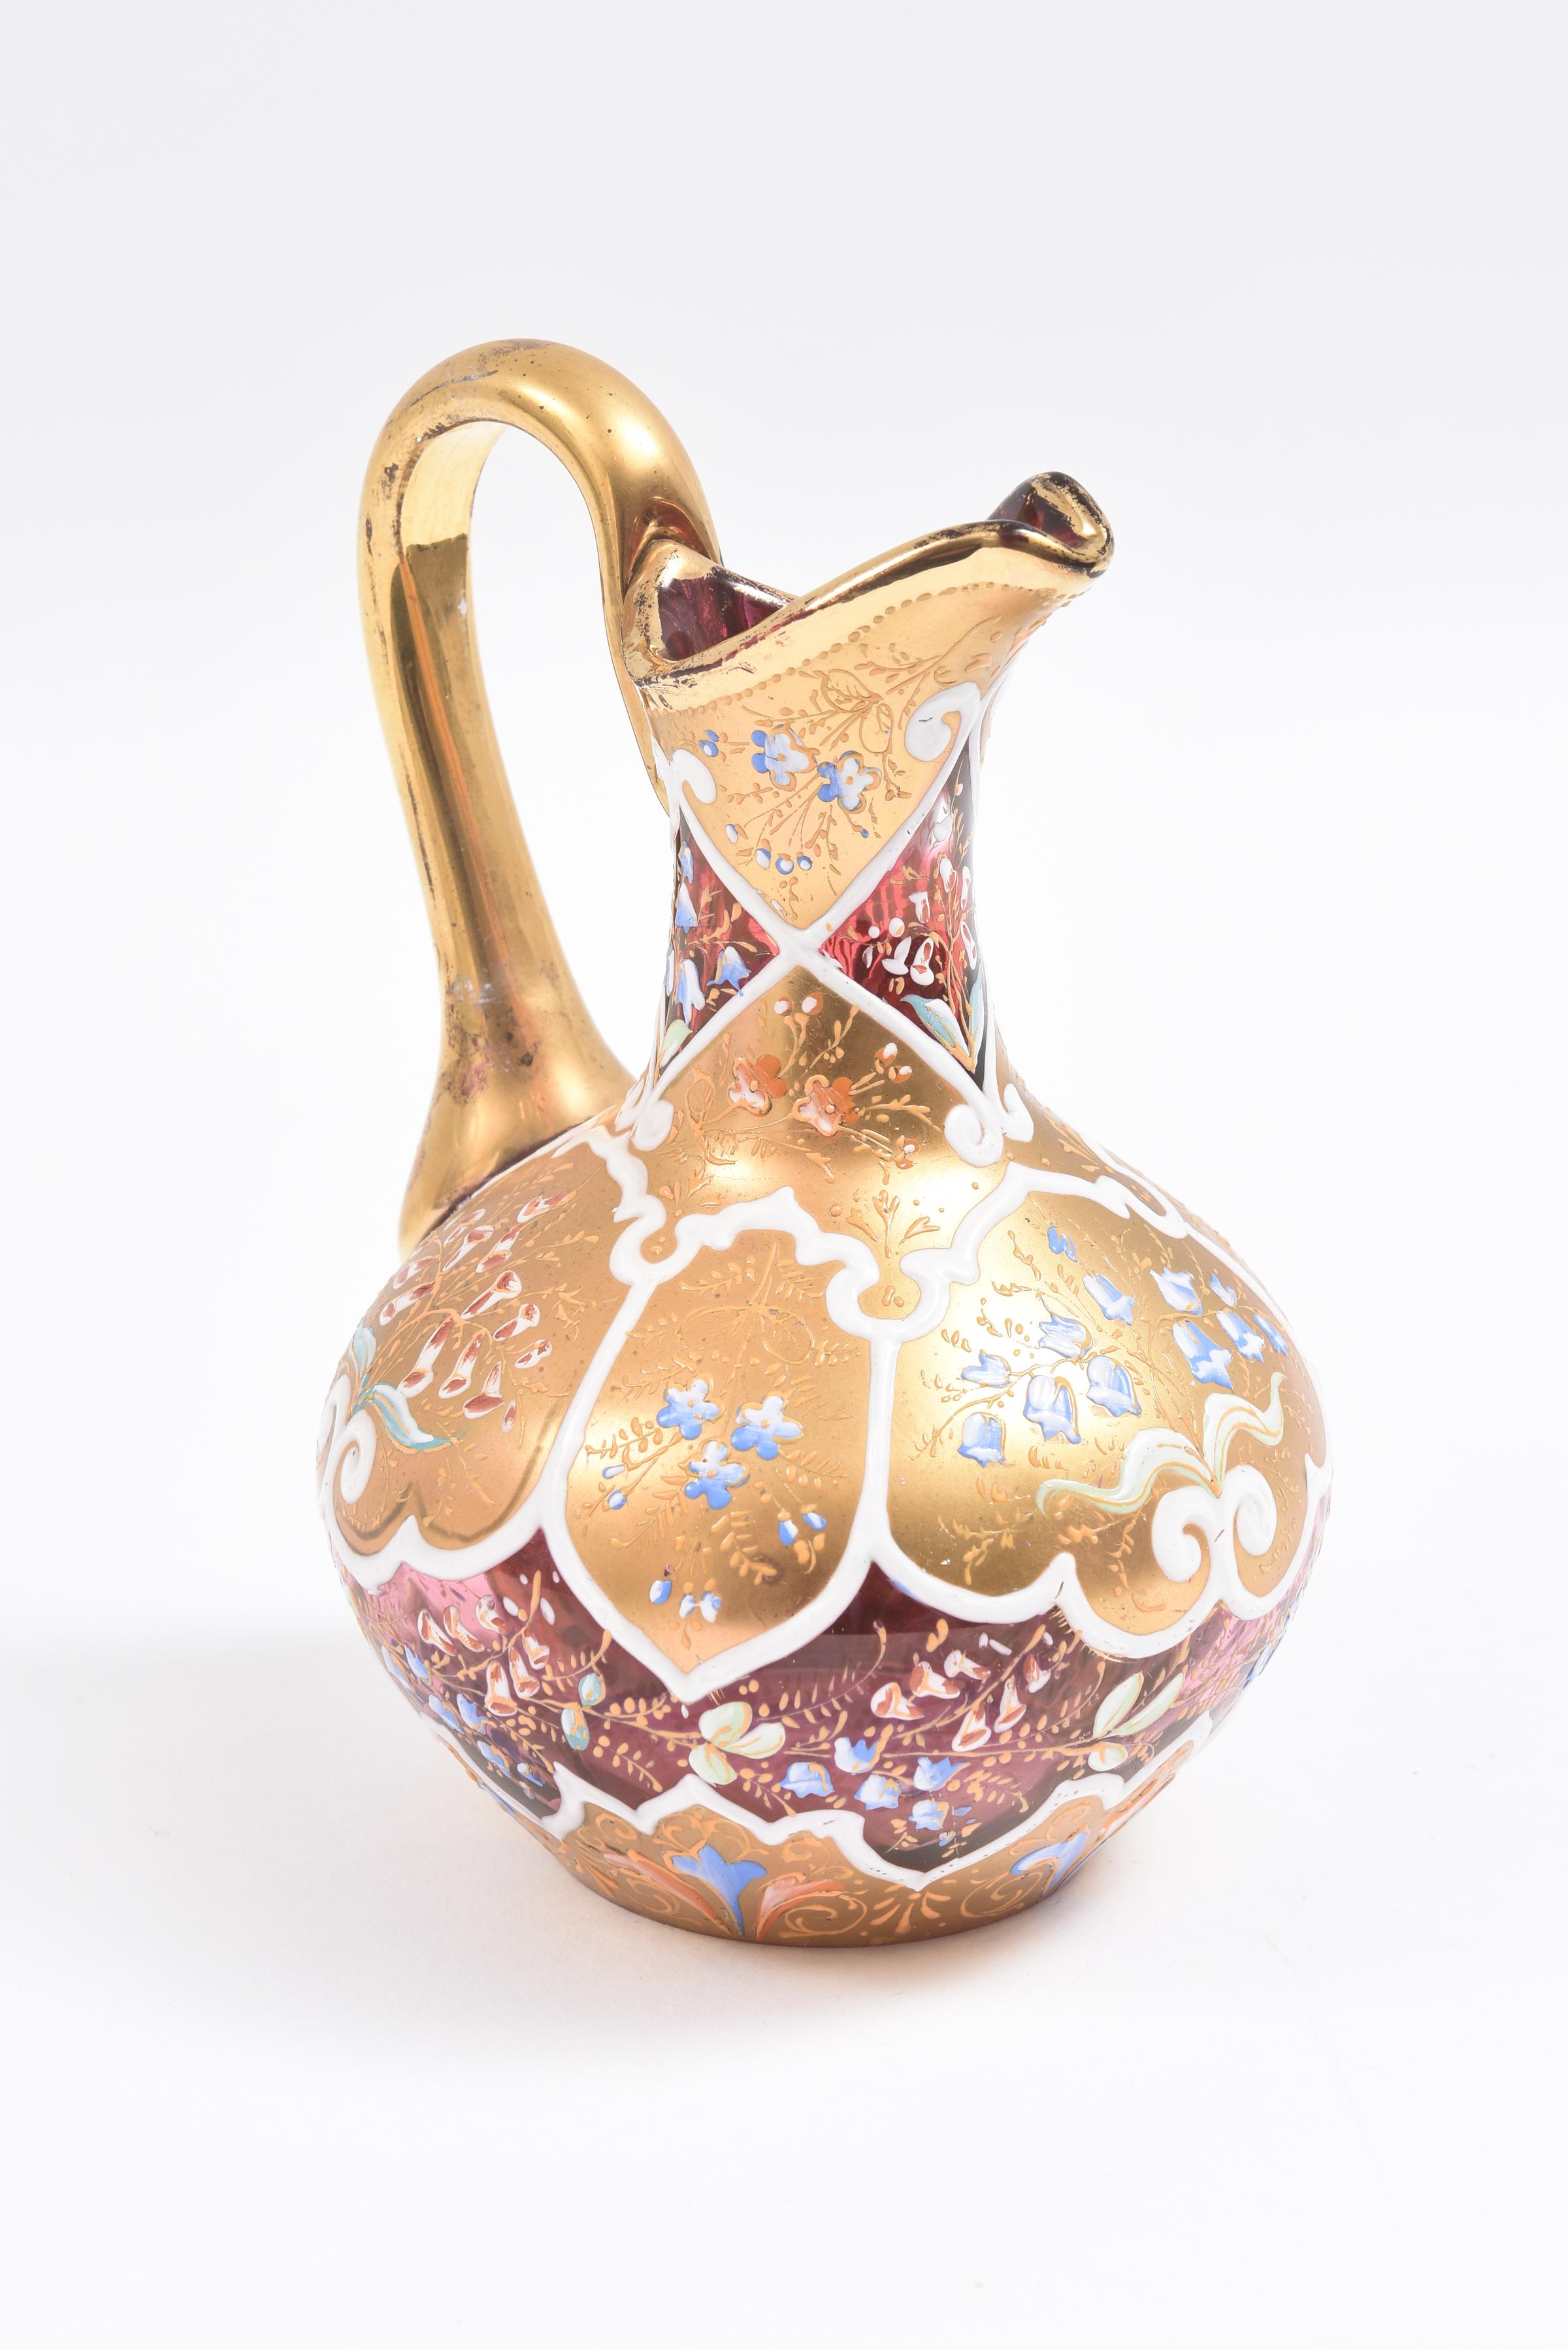 Ornate Moser Glass Enamel and Gilt Pitcher or Ewer, 19th Century In Good Condition For Sale In West Palm Beach, FL